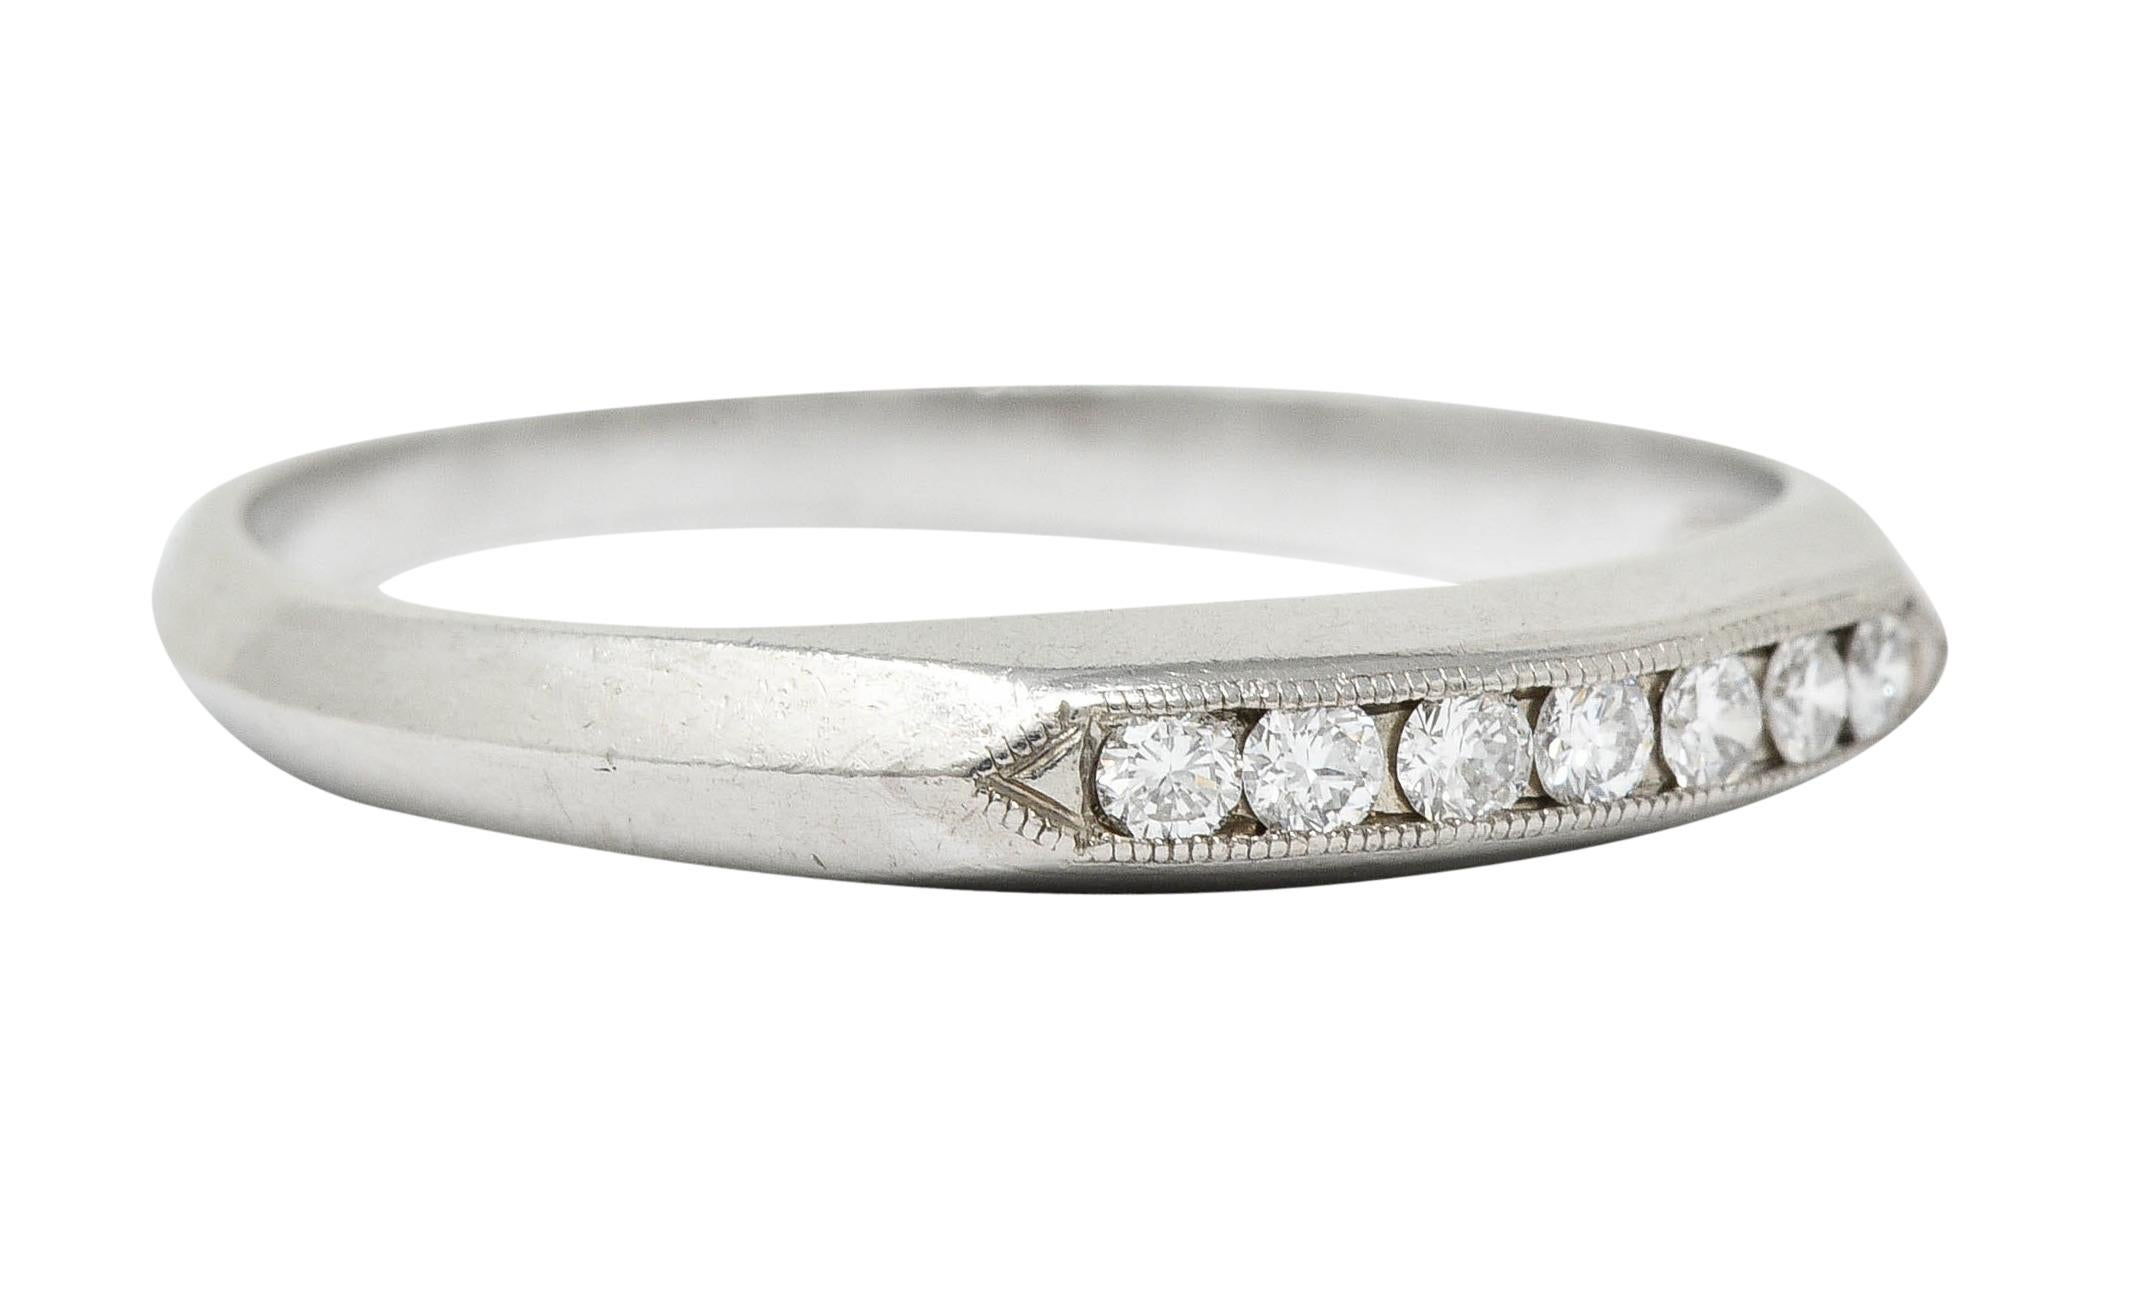 Band ring channel set to front with round brilliant cut diamonds

Weighing in total approximately 0.18 carat; eye-clean and white

Completed by milgrain, pointed shoulders, and a knife edge shank

Stamped for platinum

Circa: 1930s

Ring Size: 6 1/4